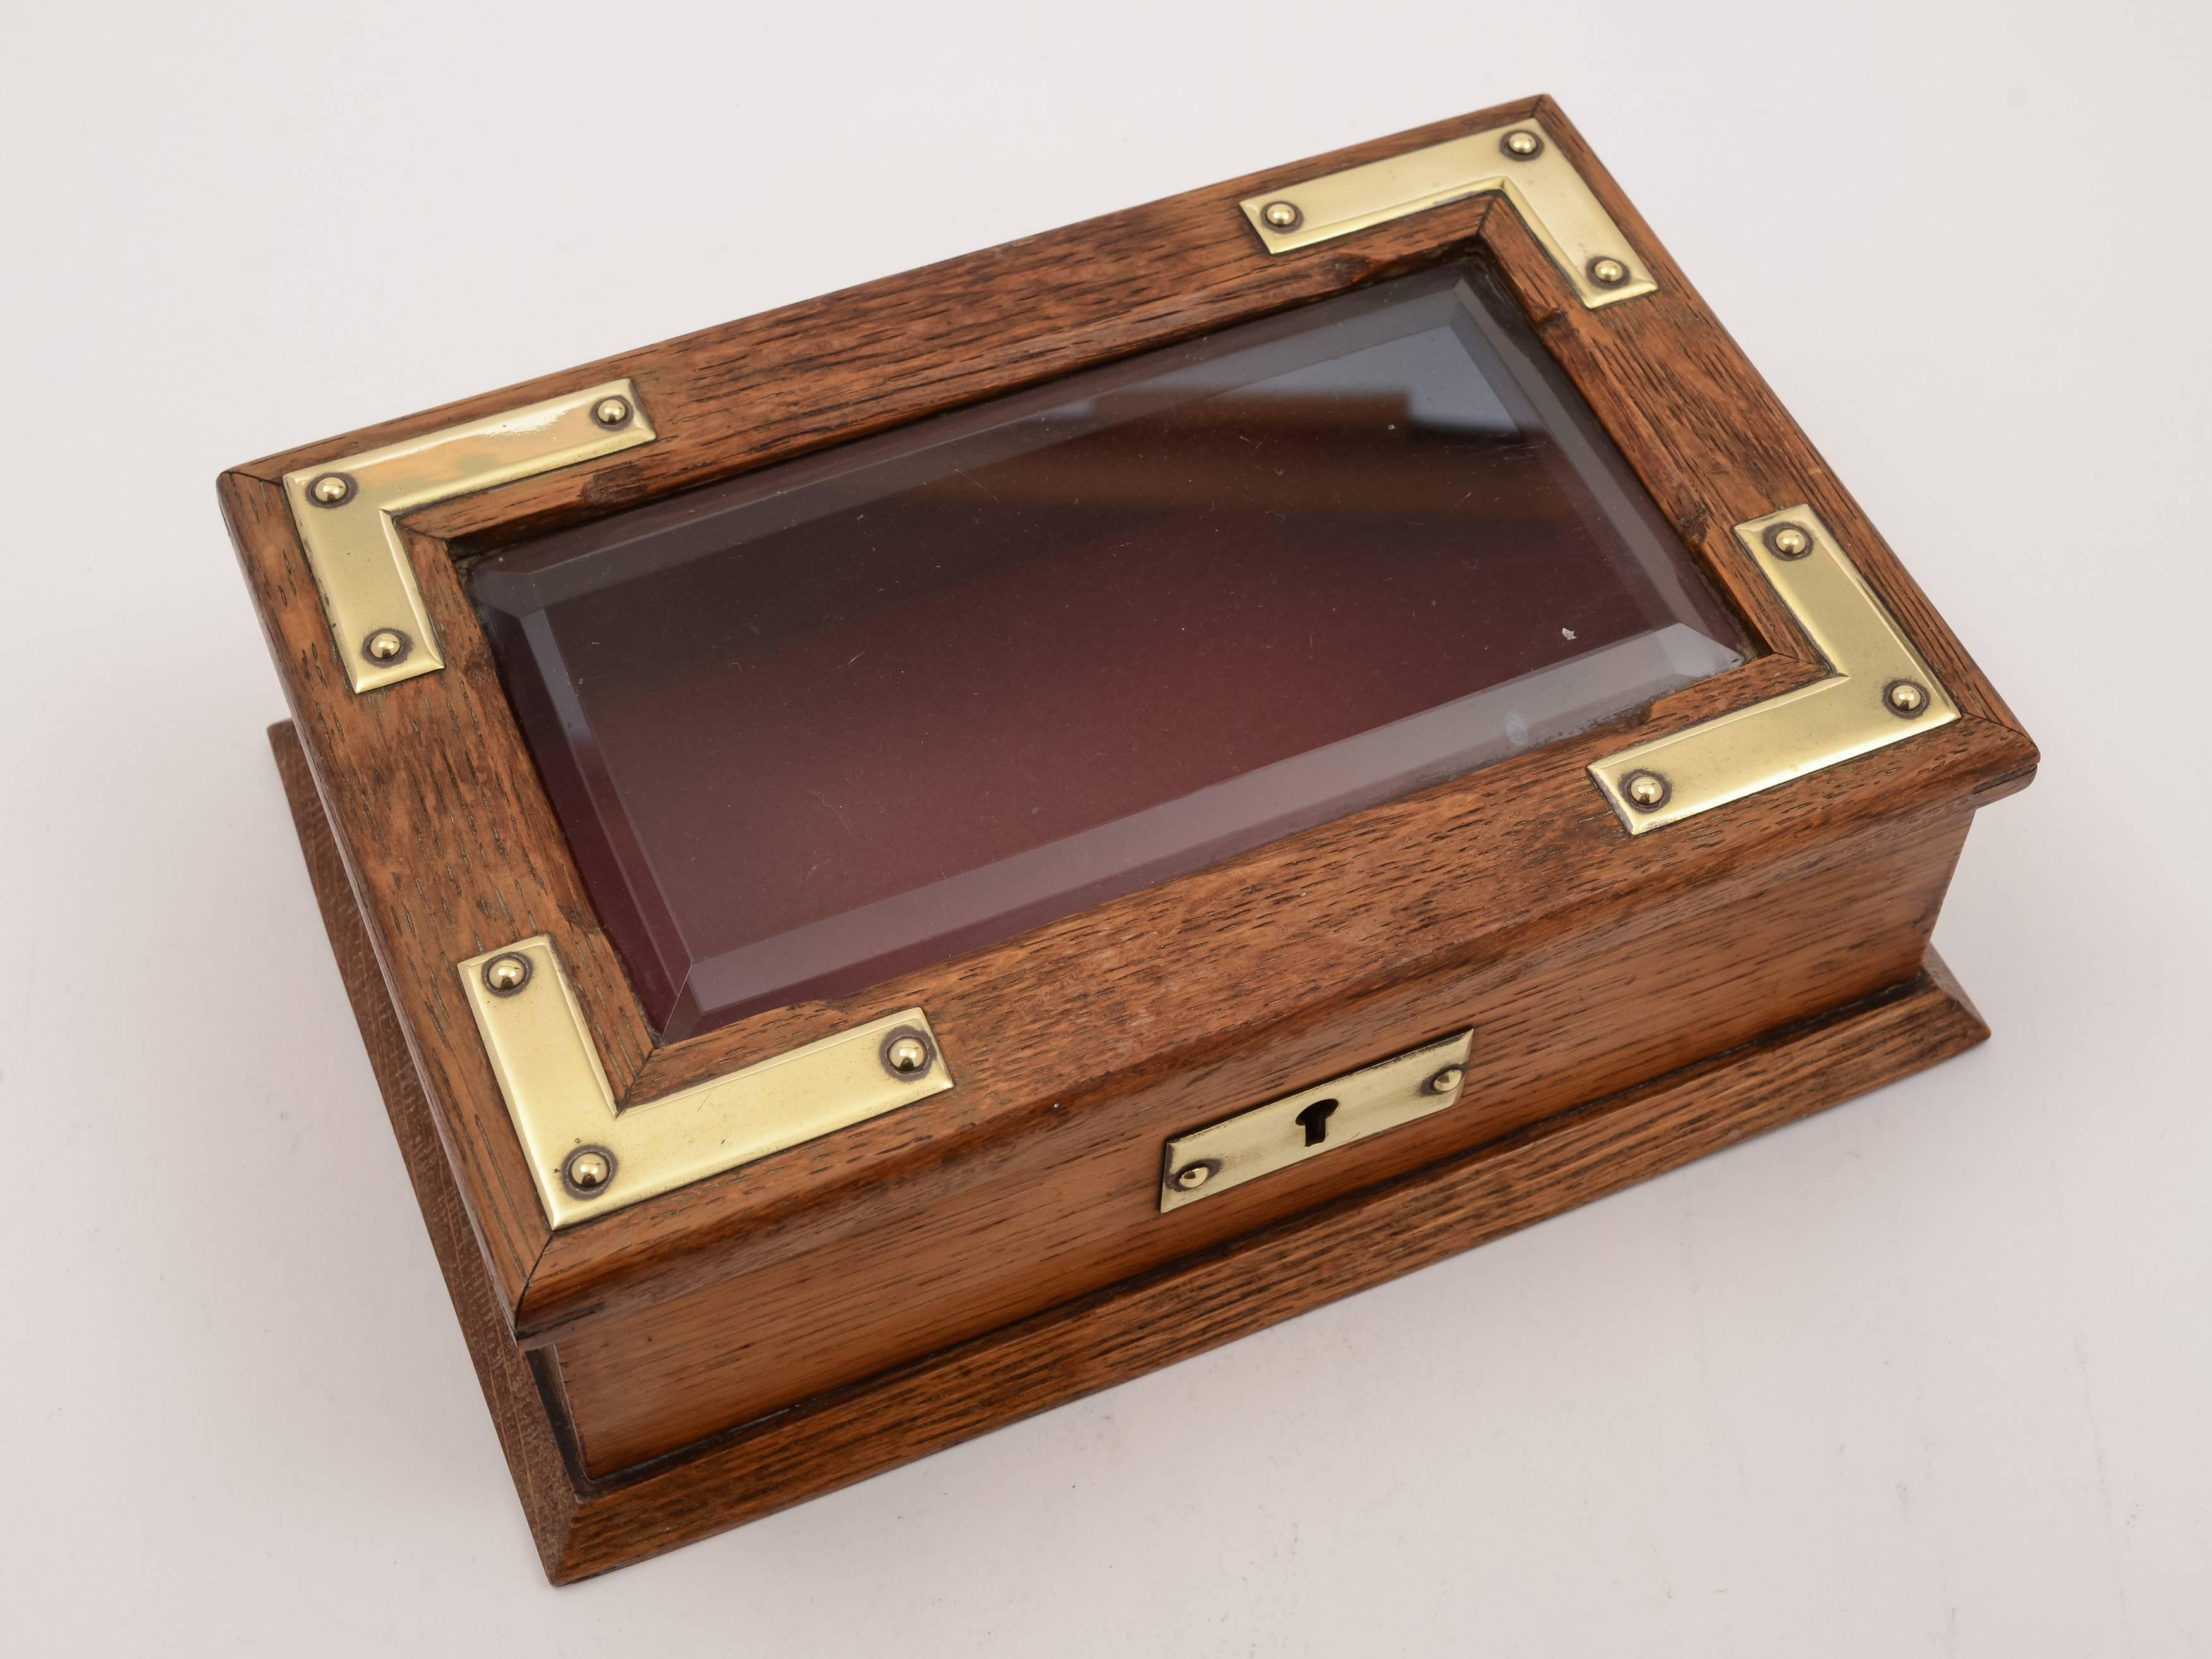 A good English Edwardian oak jewelry box with brass mounts, bevelled glass top, functioning lock and key, circa 1905.

Total weight: 1088g.
         